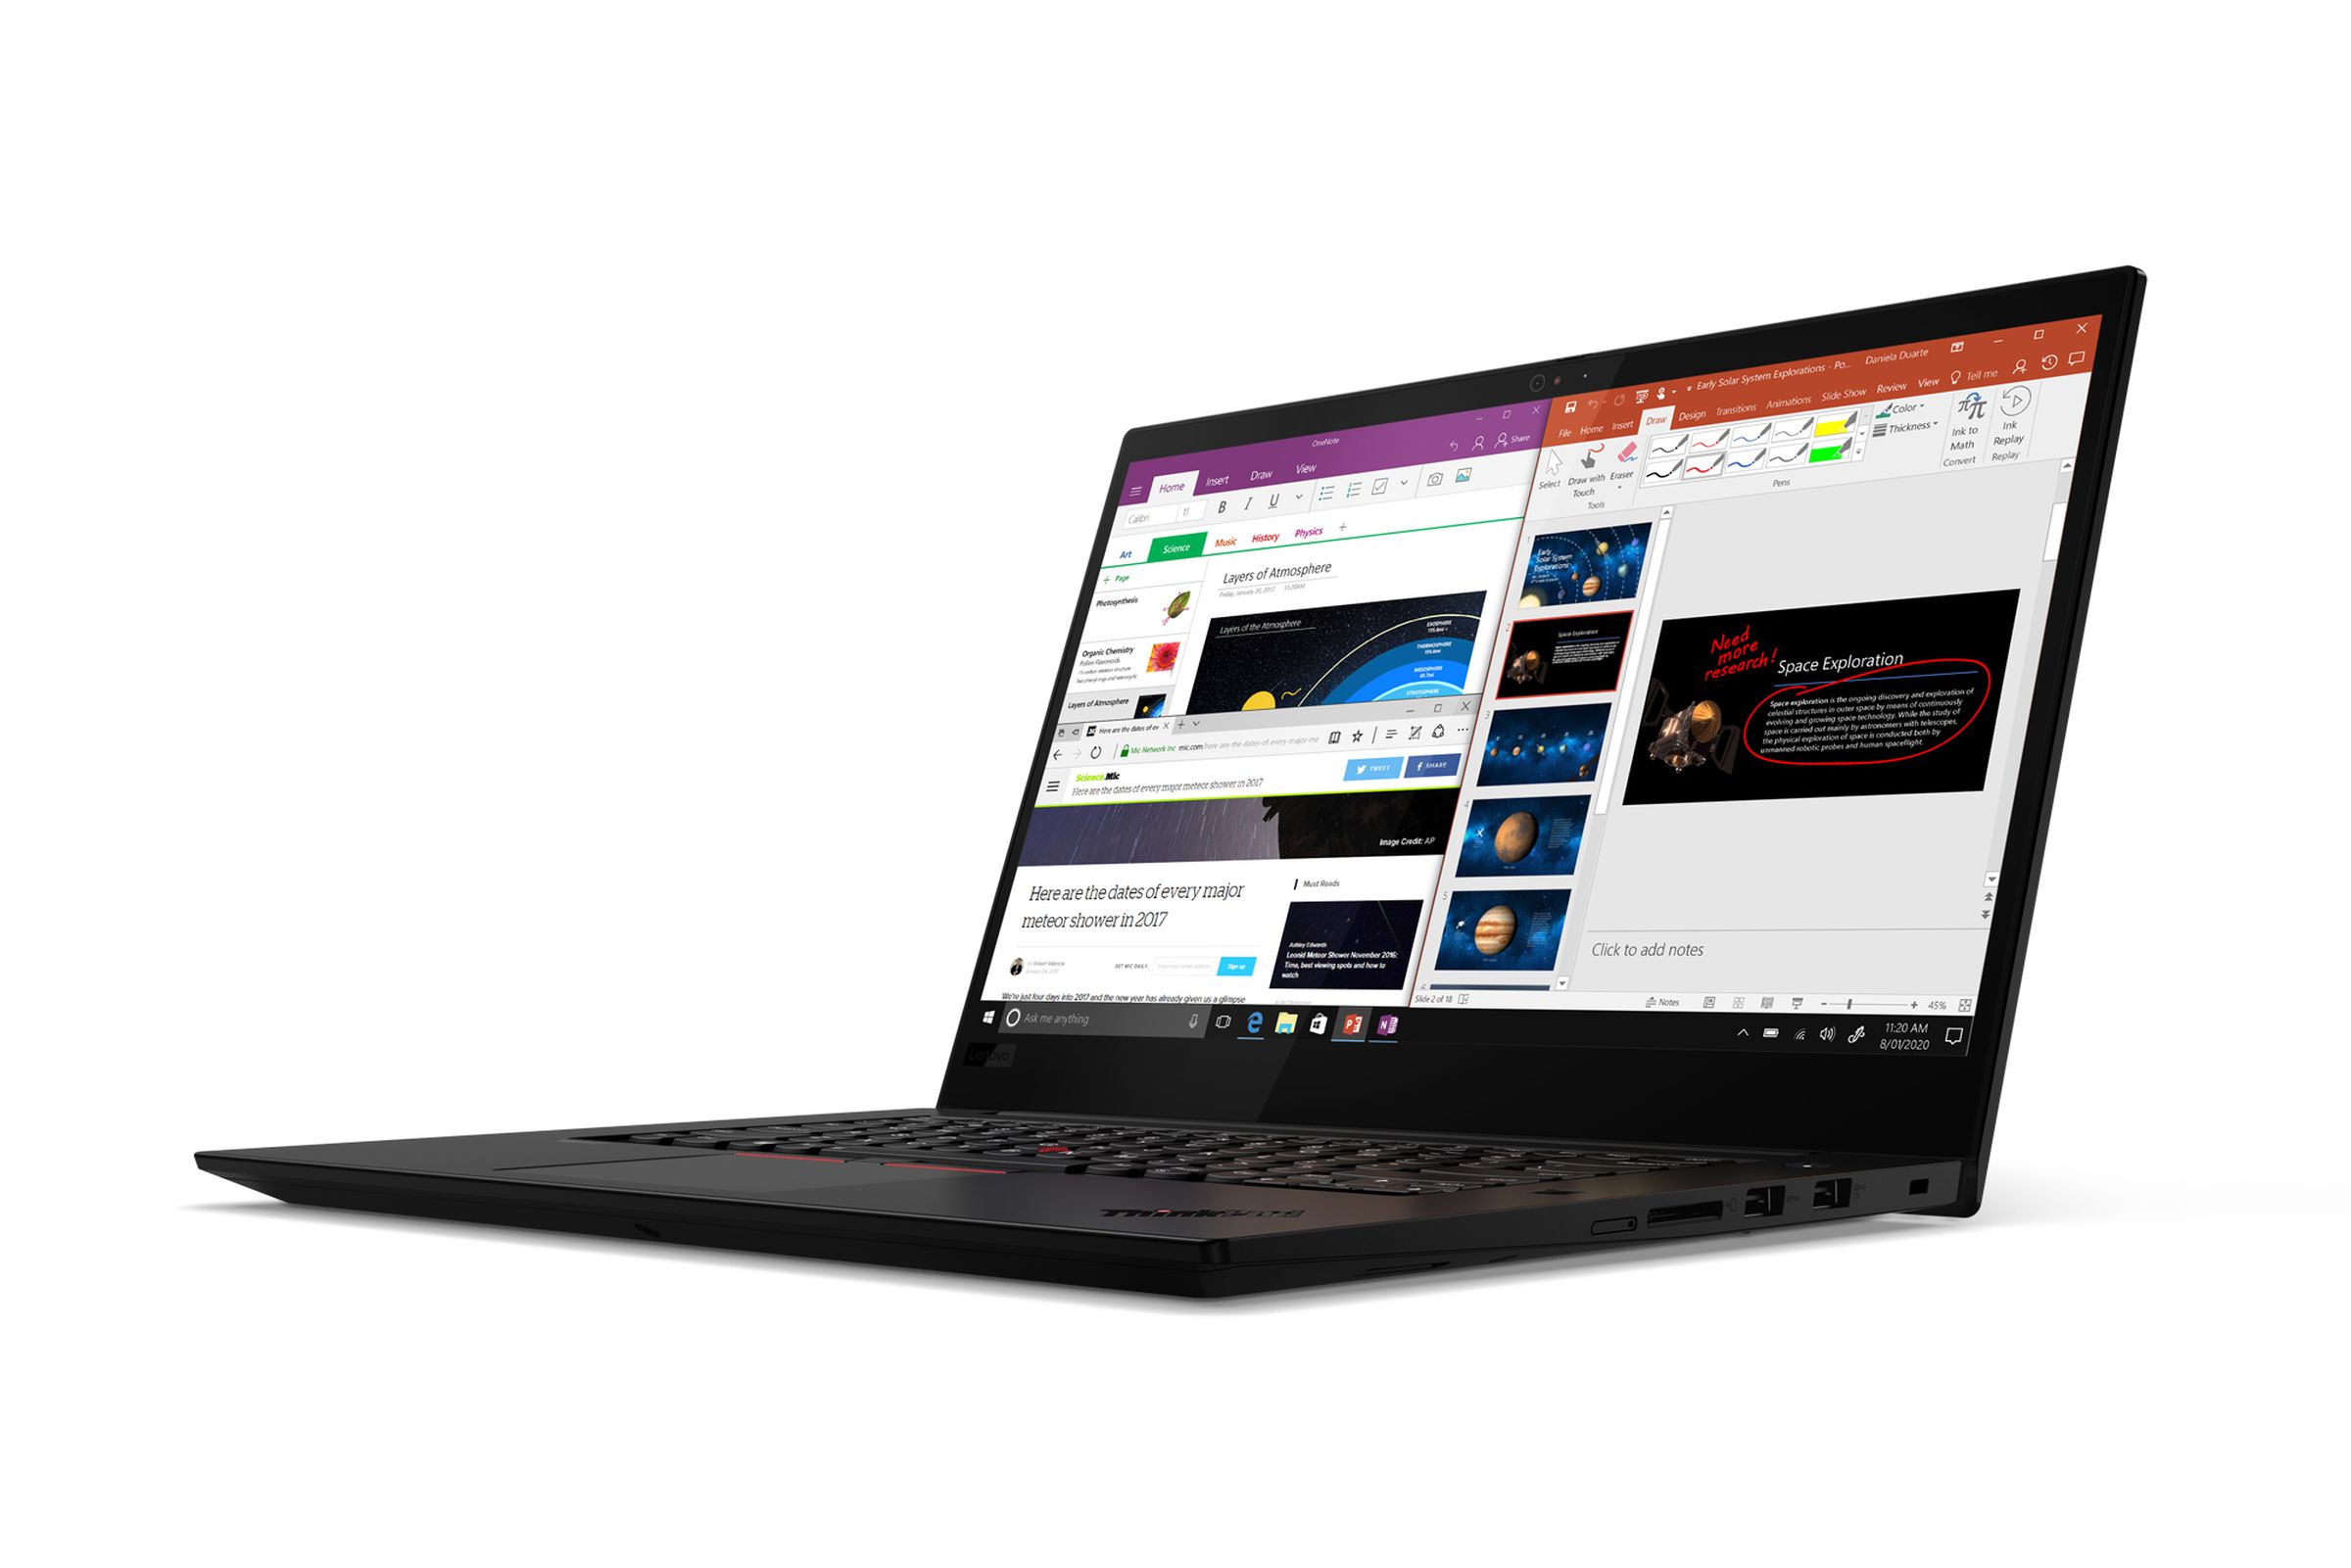 The Lenovo ThinkPad X1 Extreme comes with up to a 10th-Gen H-Series Intel Core i9 processor.